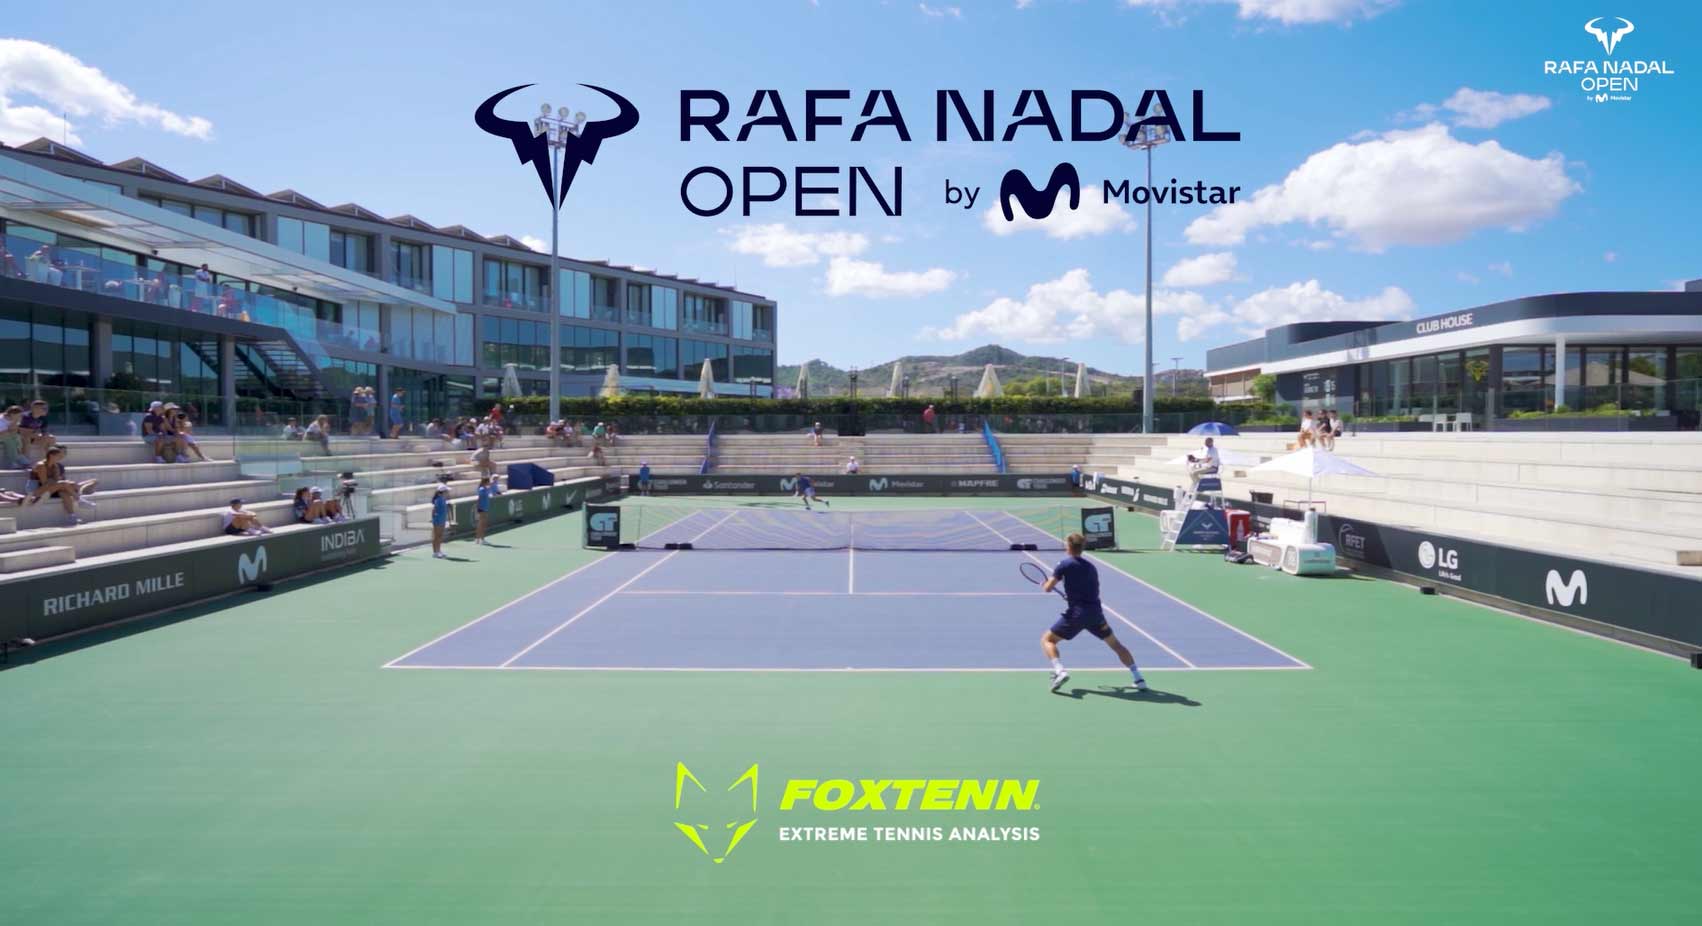 The Rafa Nadal Open by Movistar makes history by implementing FoxTenn technology